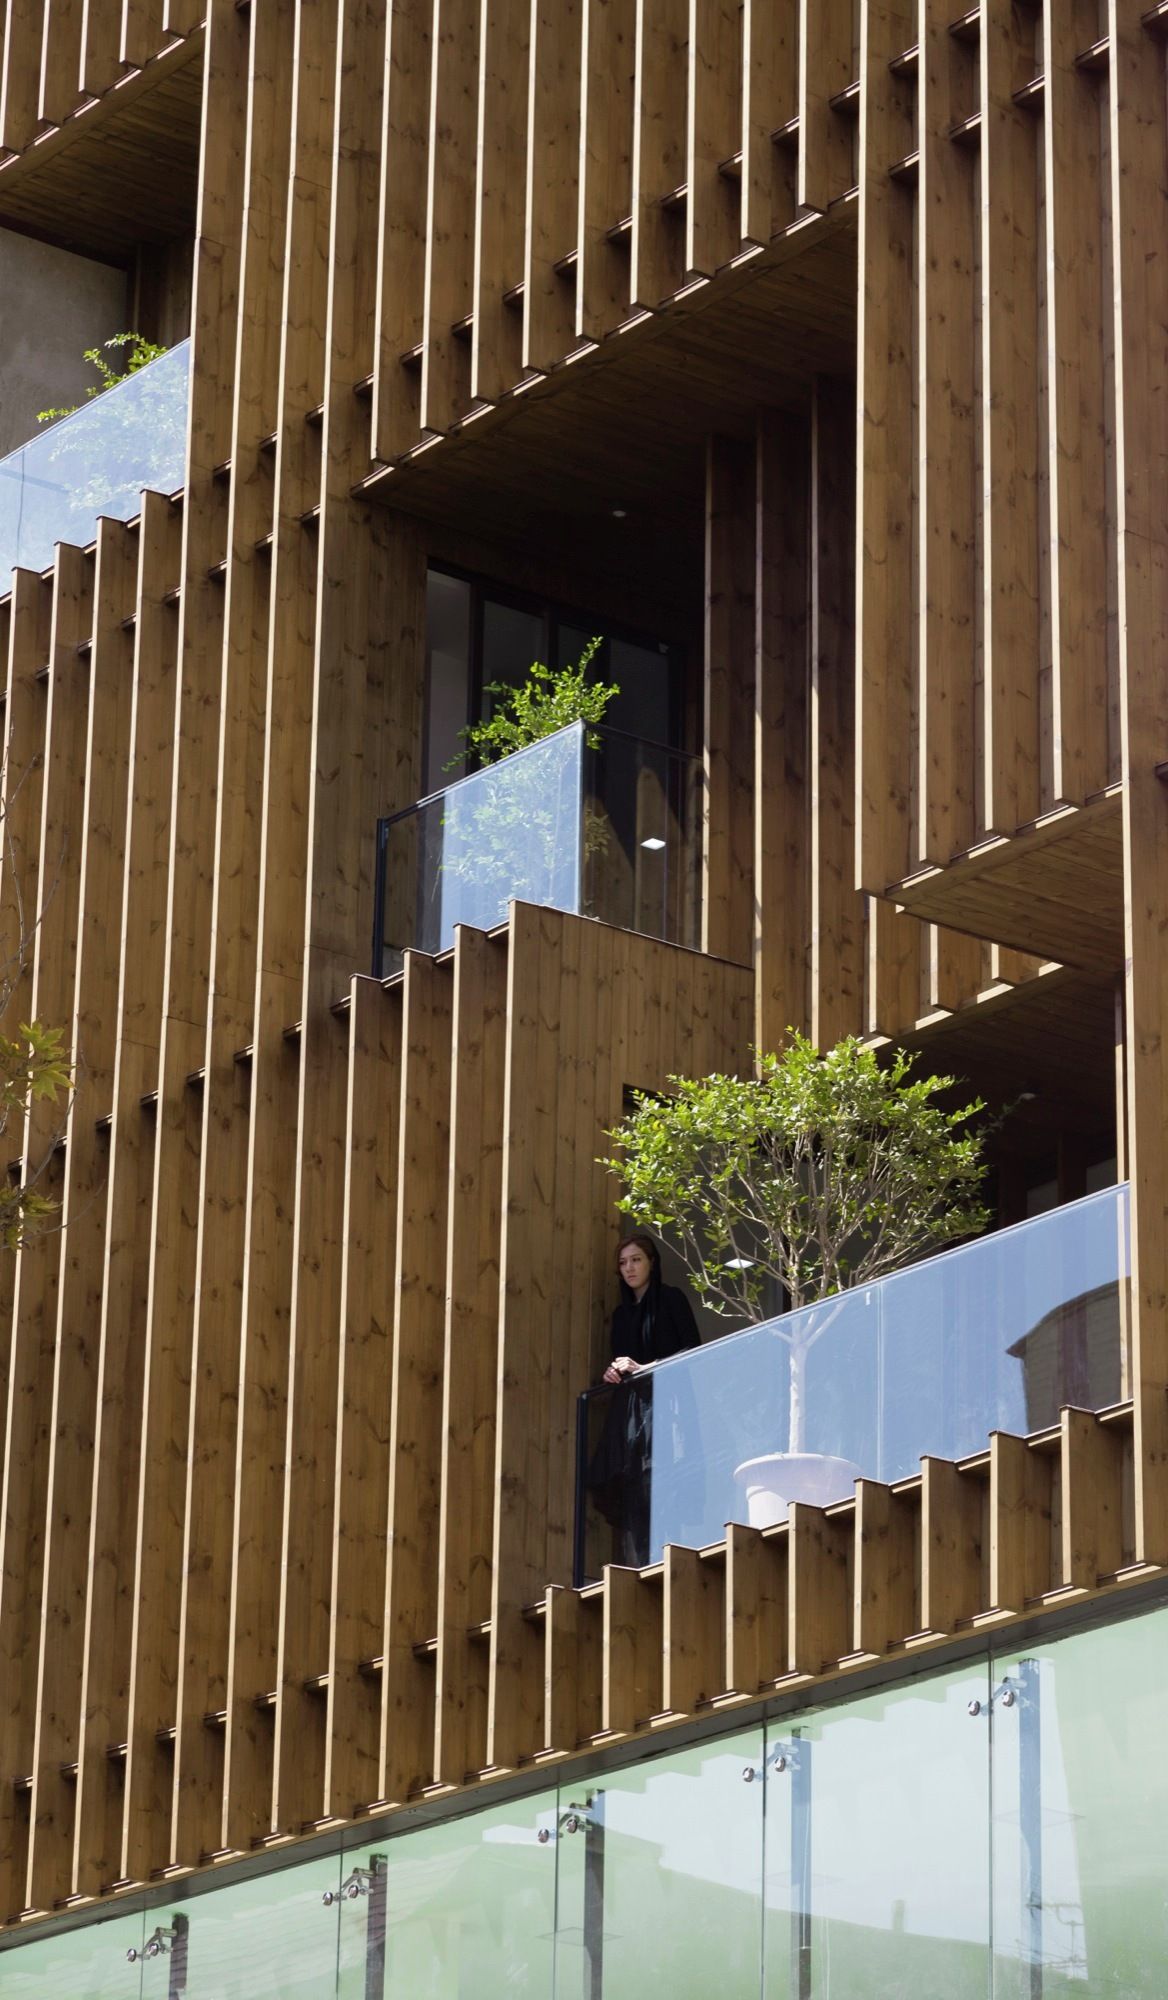 Stylish Balconies Become Integral Parts Of Their Building's Facade